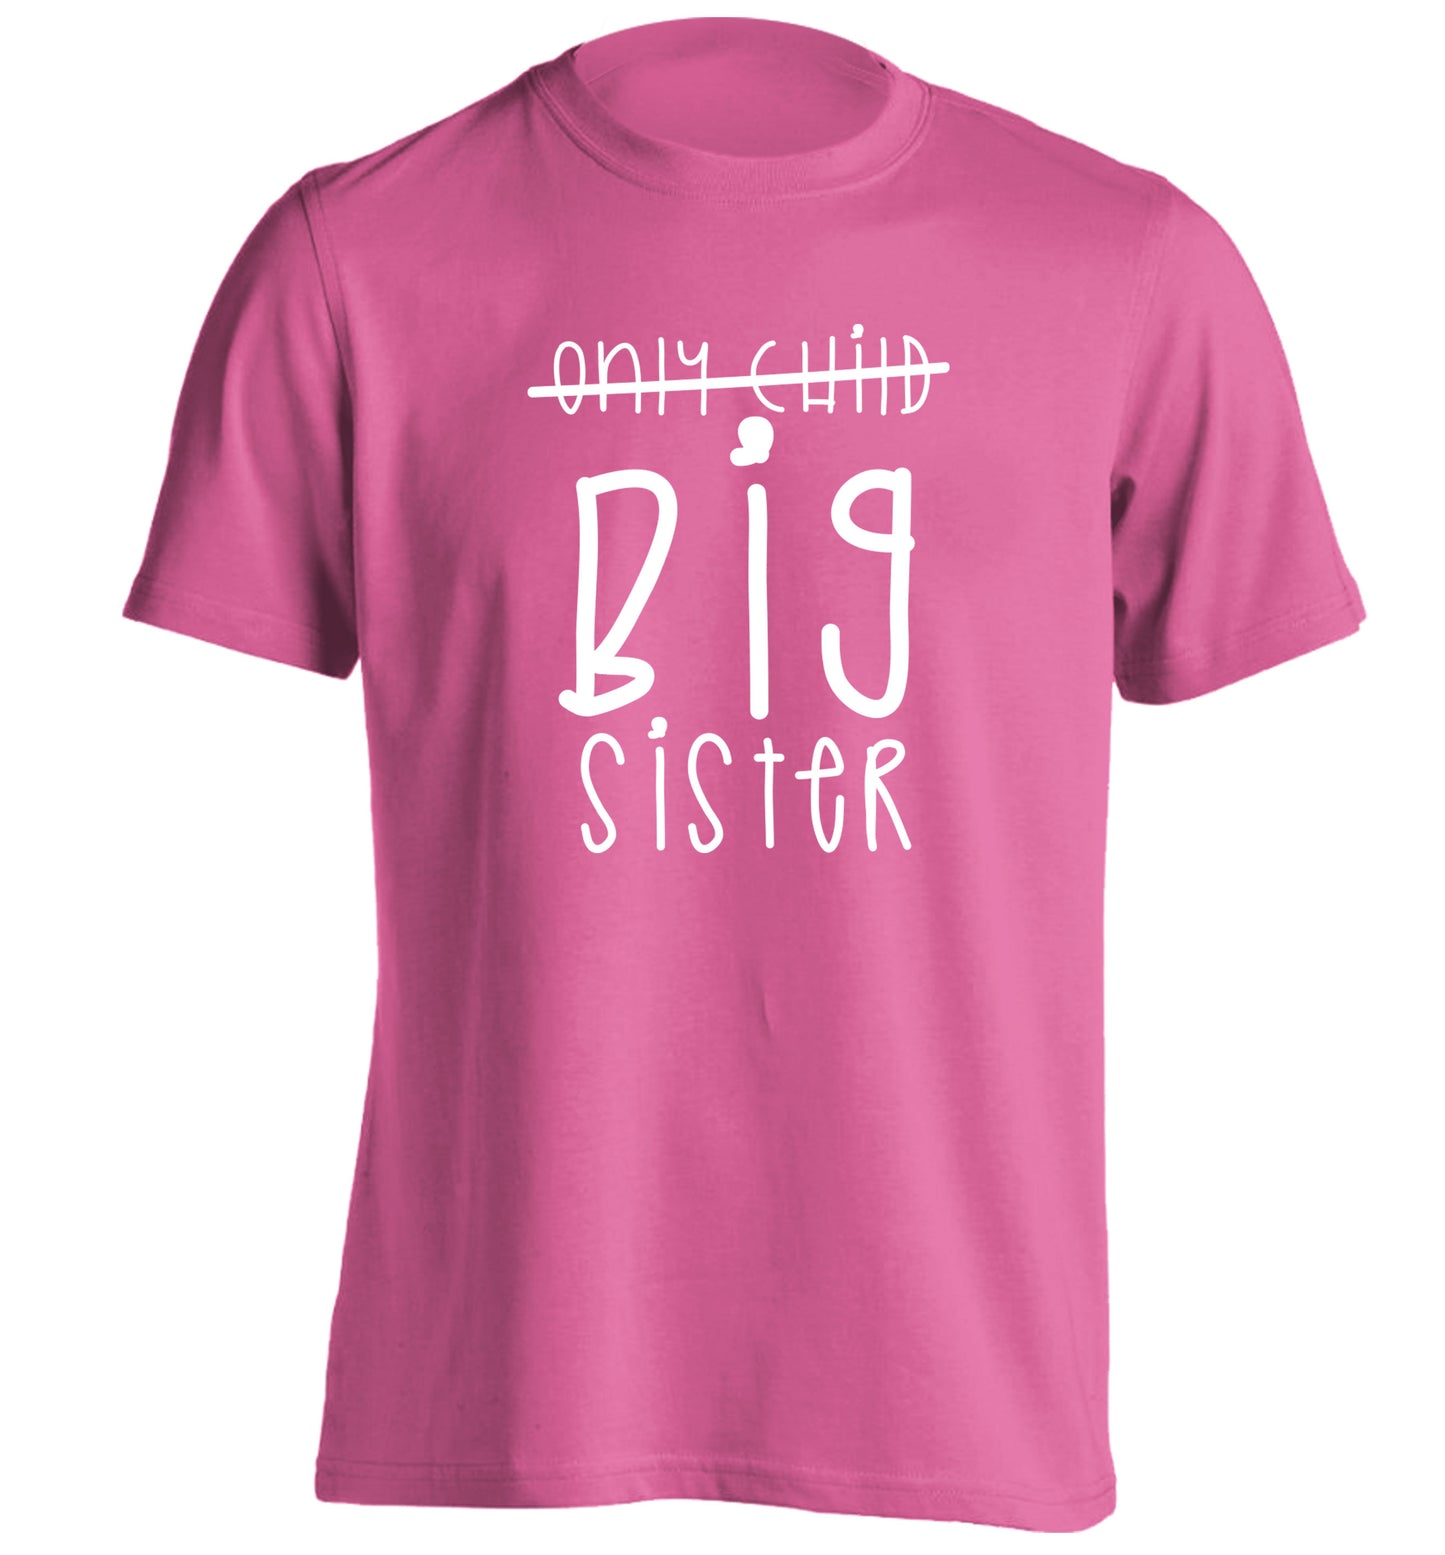 Only child big sister adults unisex pink Tshirt 2XL